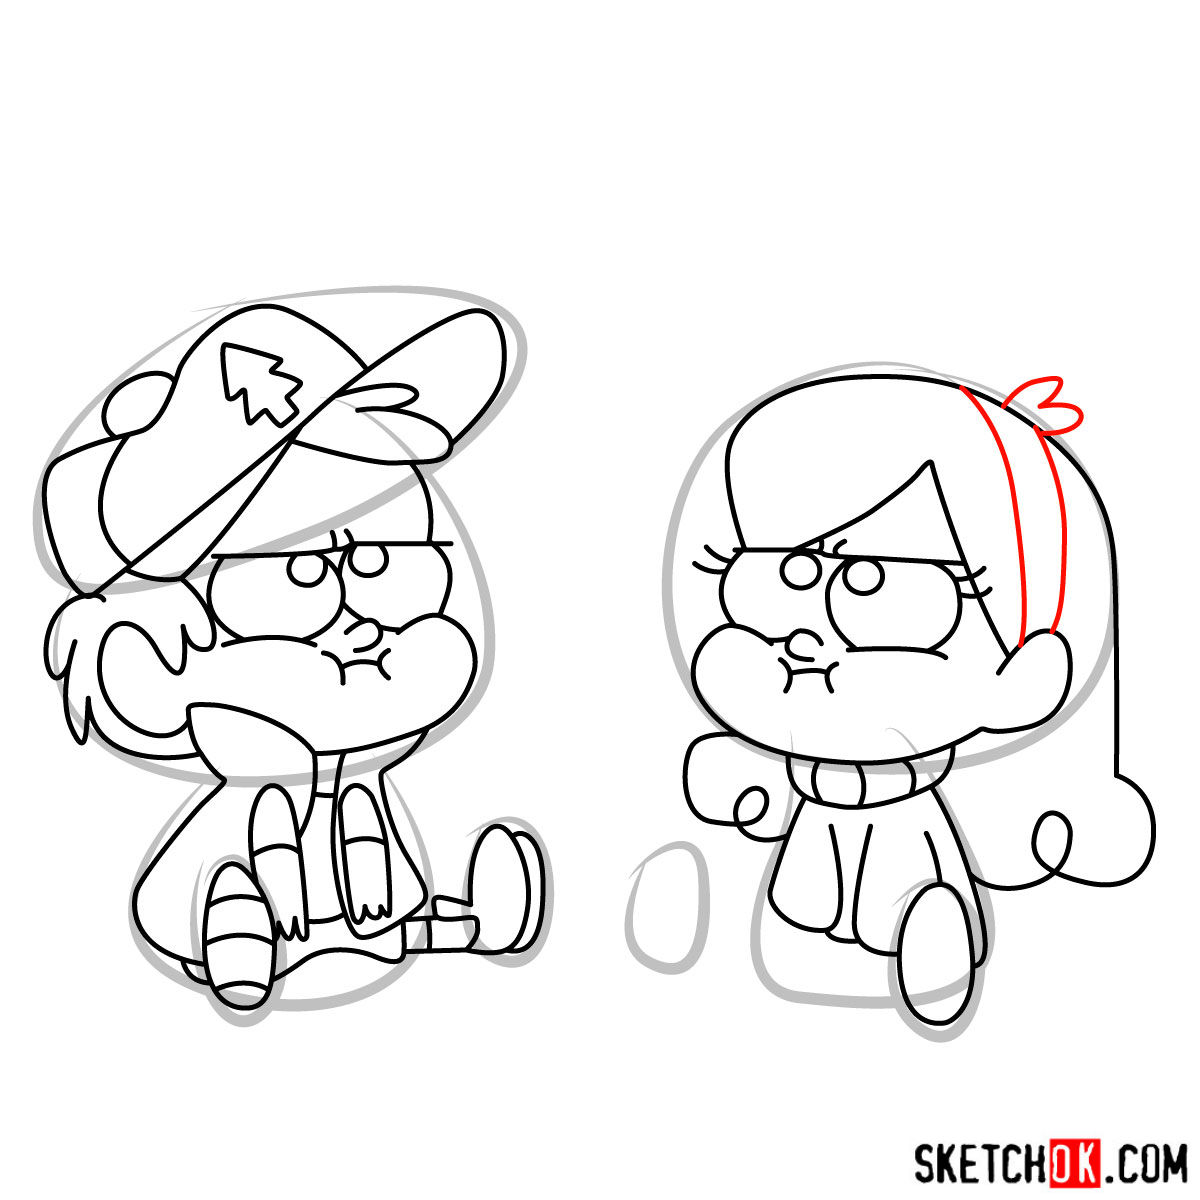 How to draw Dipper and Mabel Pines chibi style - step 13